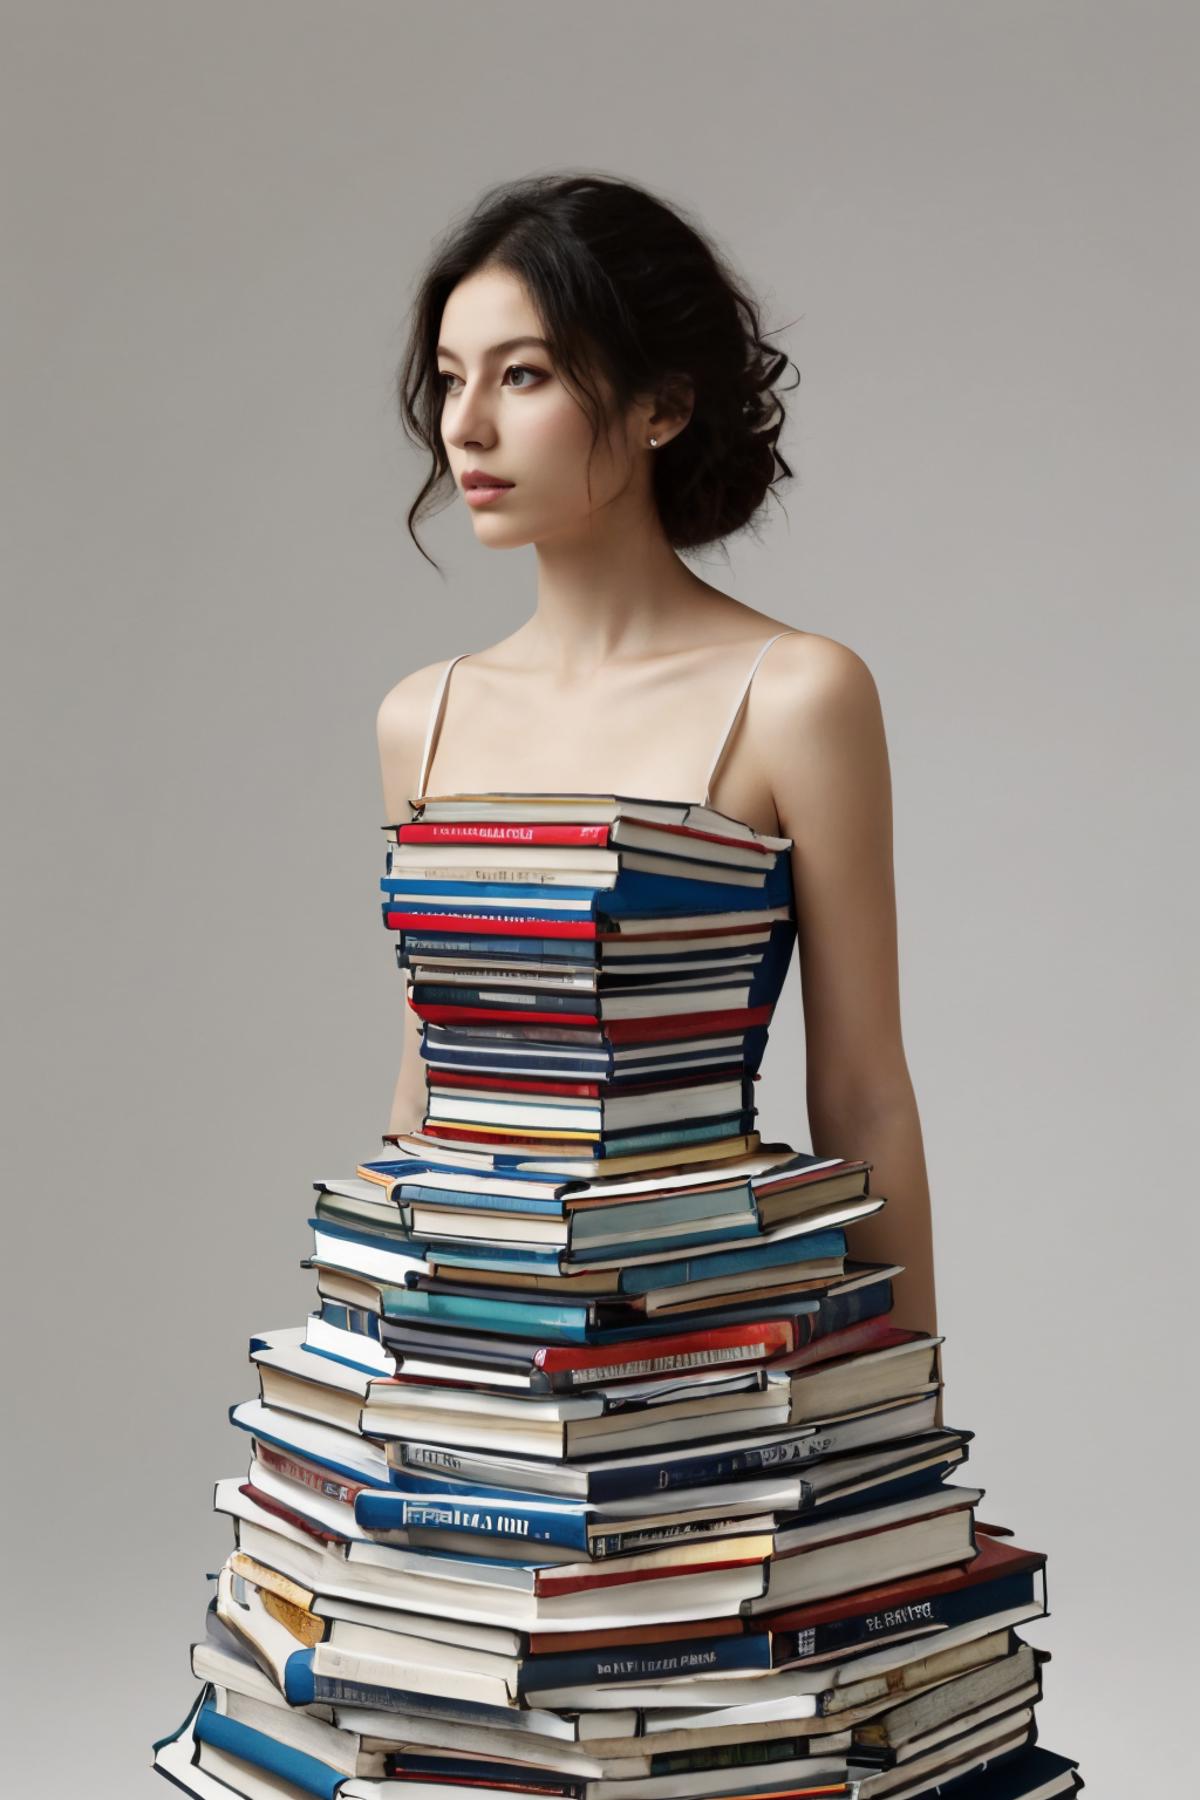 A woman in a dress made out of books.